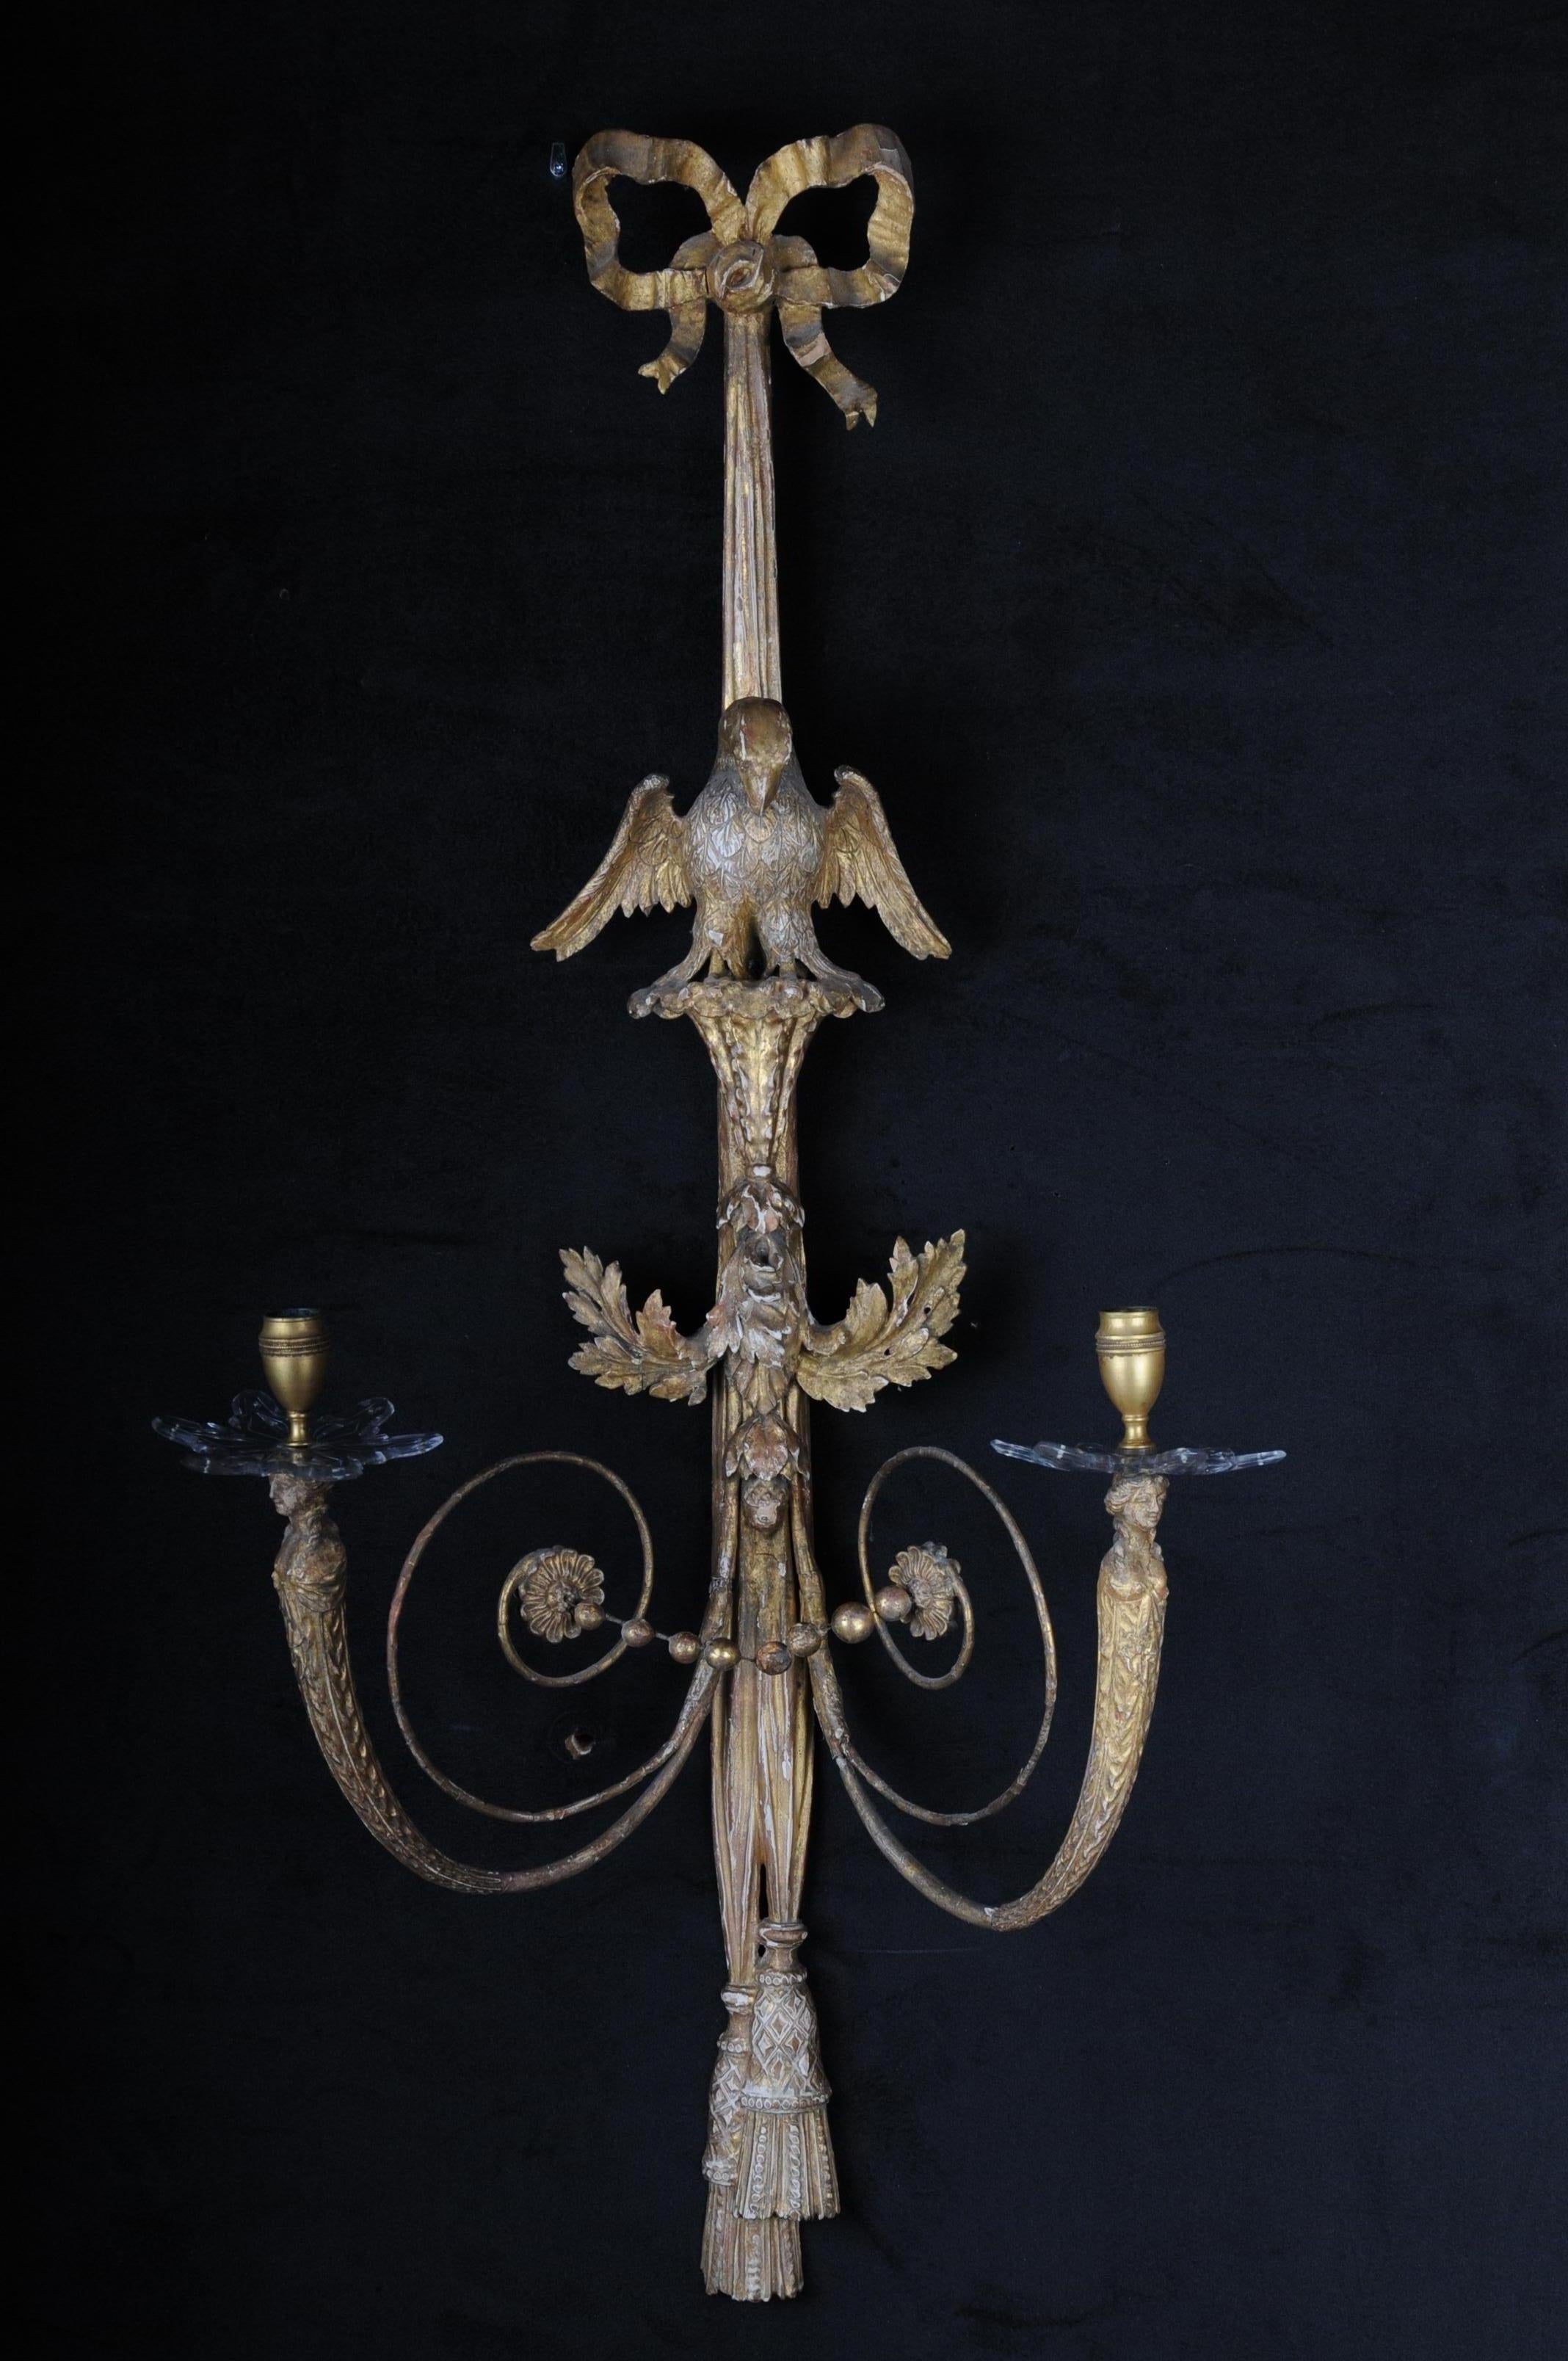 Pair of large Empire appliqués / sconces circa 1800, gilded linden wood

Solid linden wood, gilded two-flame. Carved, gilded. Ribbon, each with a central, fully sculpted eagle sculpture. Volutes light arms, ending in female busts. Candle spouts